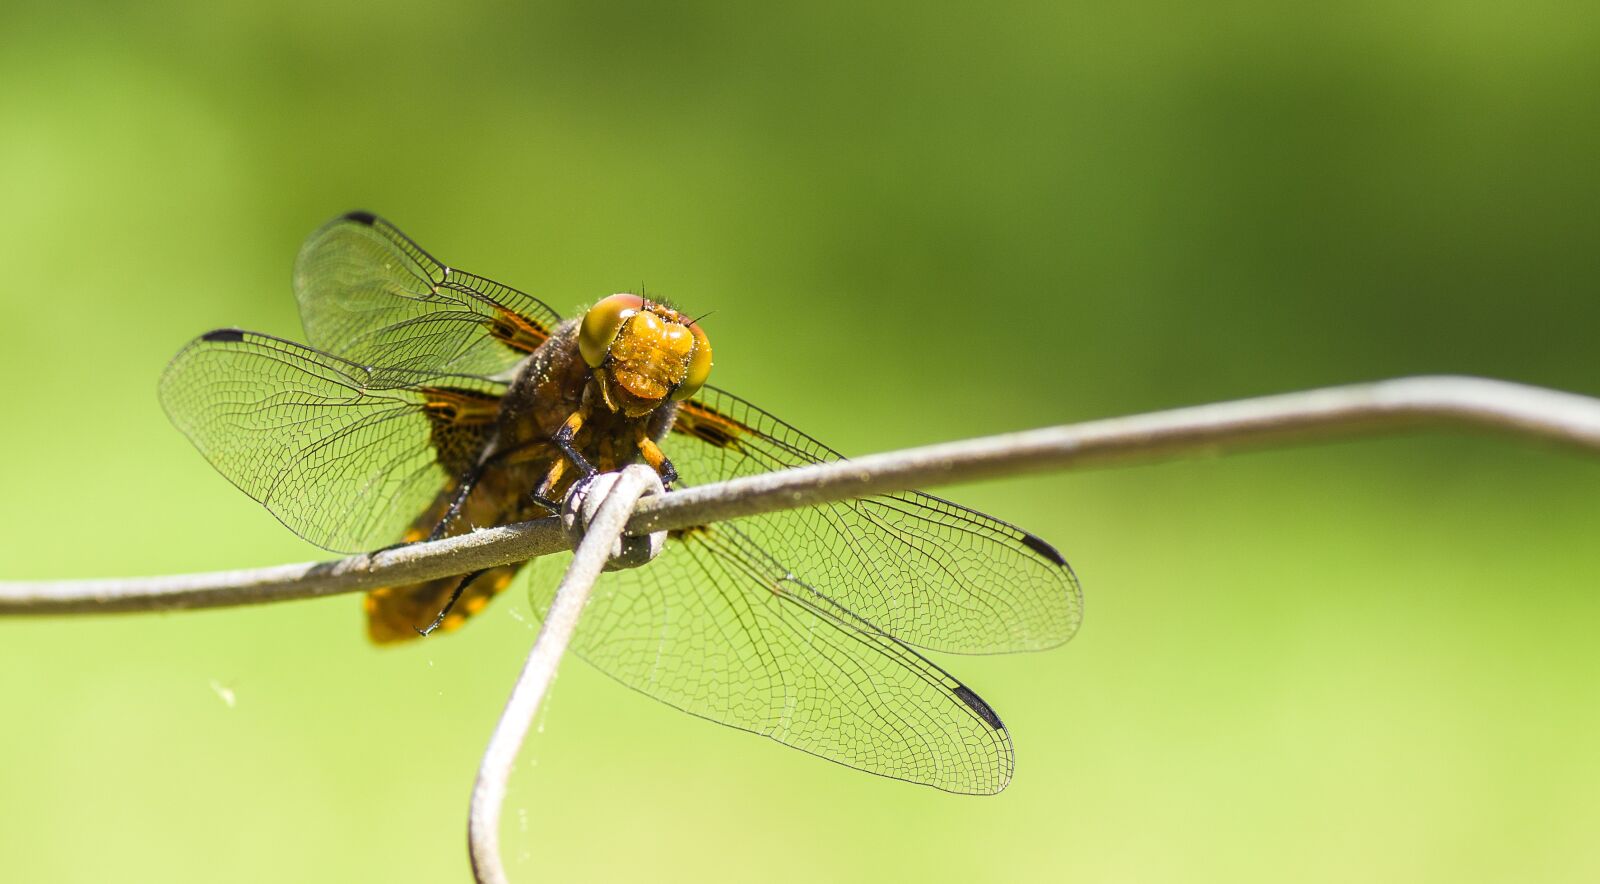 Pentax K-70 + Tamron SP AF 90mm F2.8 Di Macro sample photo. Insect, nature, dragonfly photography